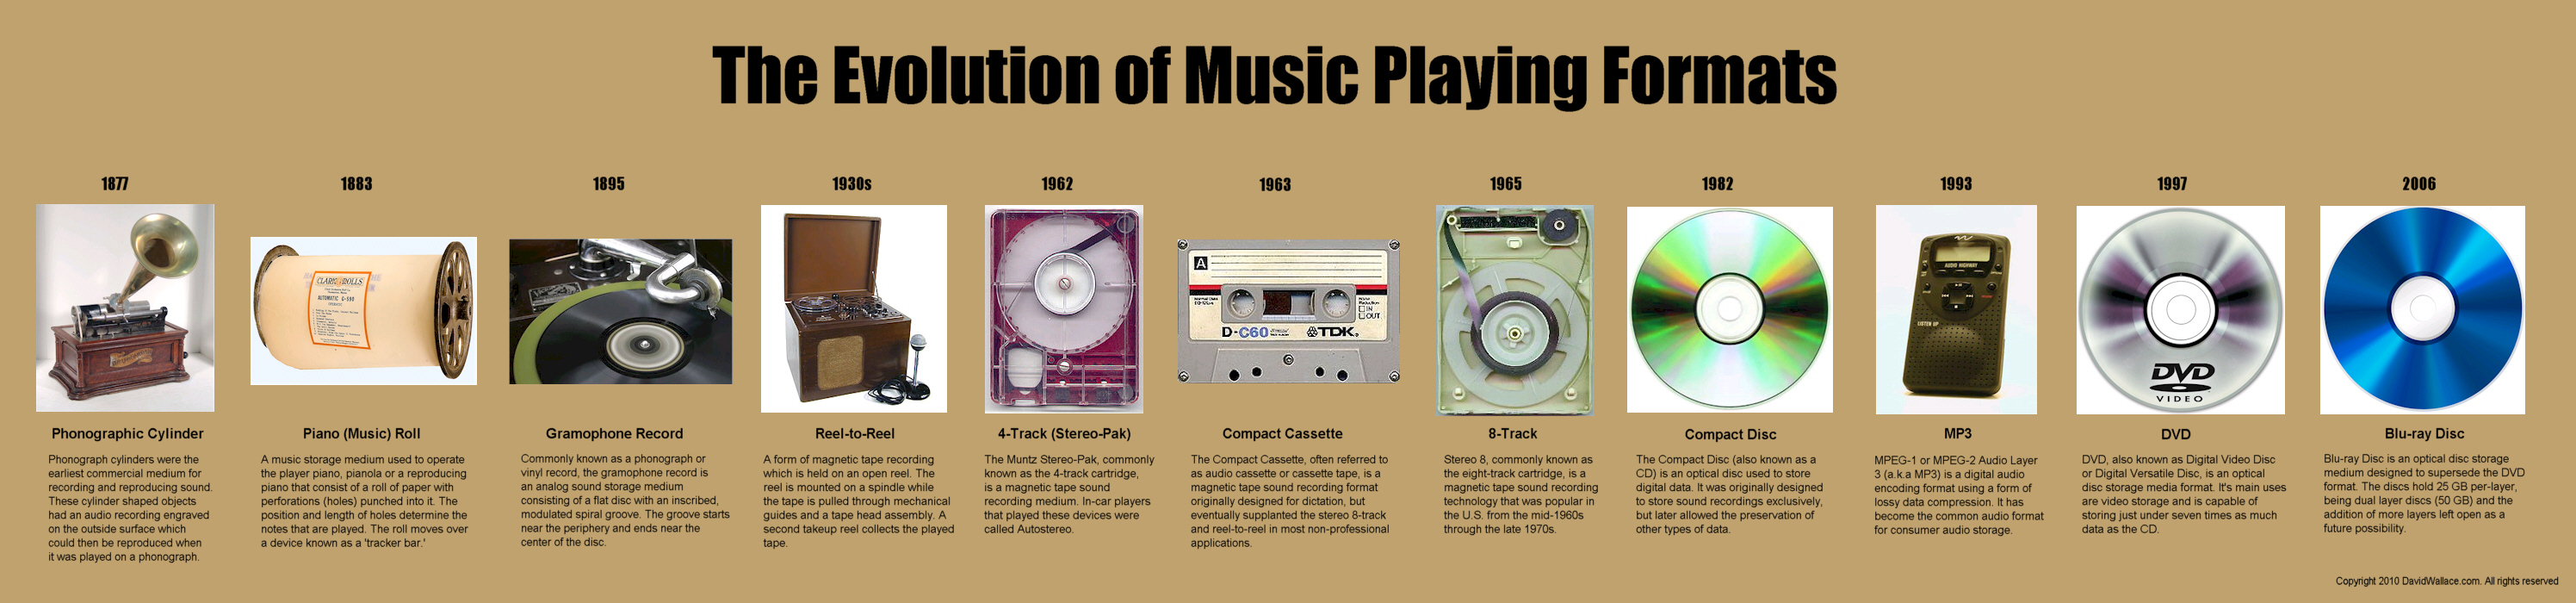 The Evolution Of Music Playing Formats Infographic David Wallace